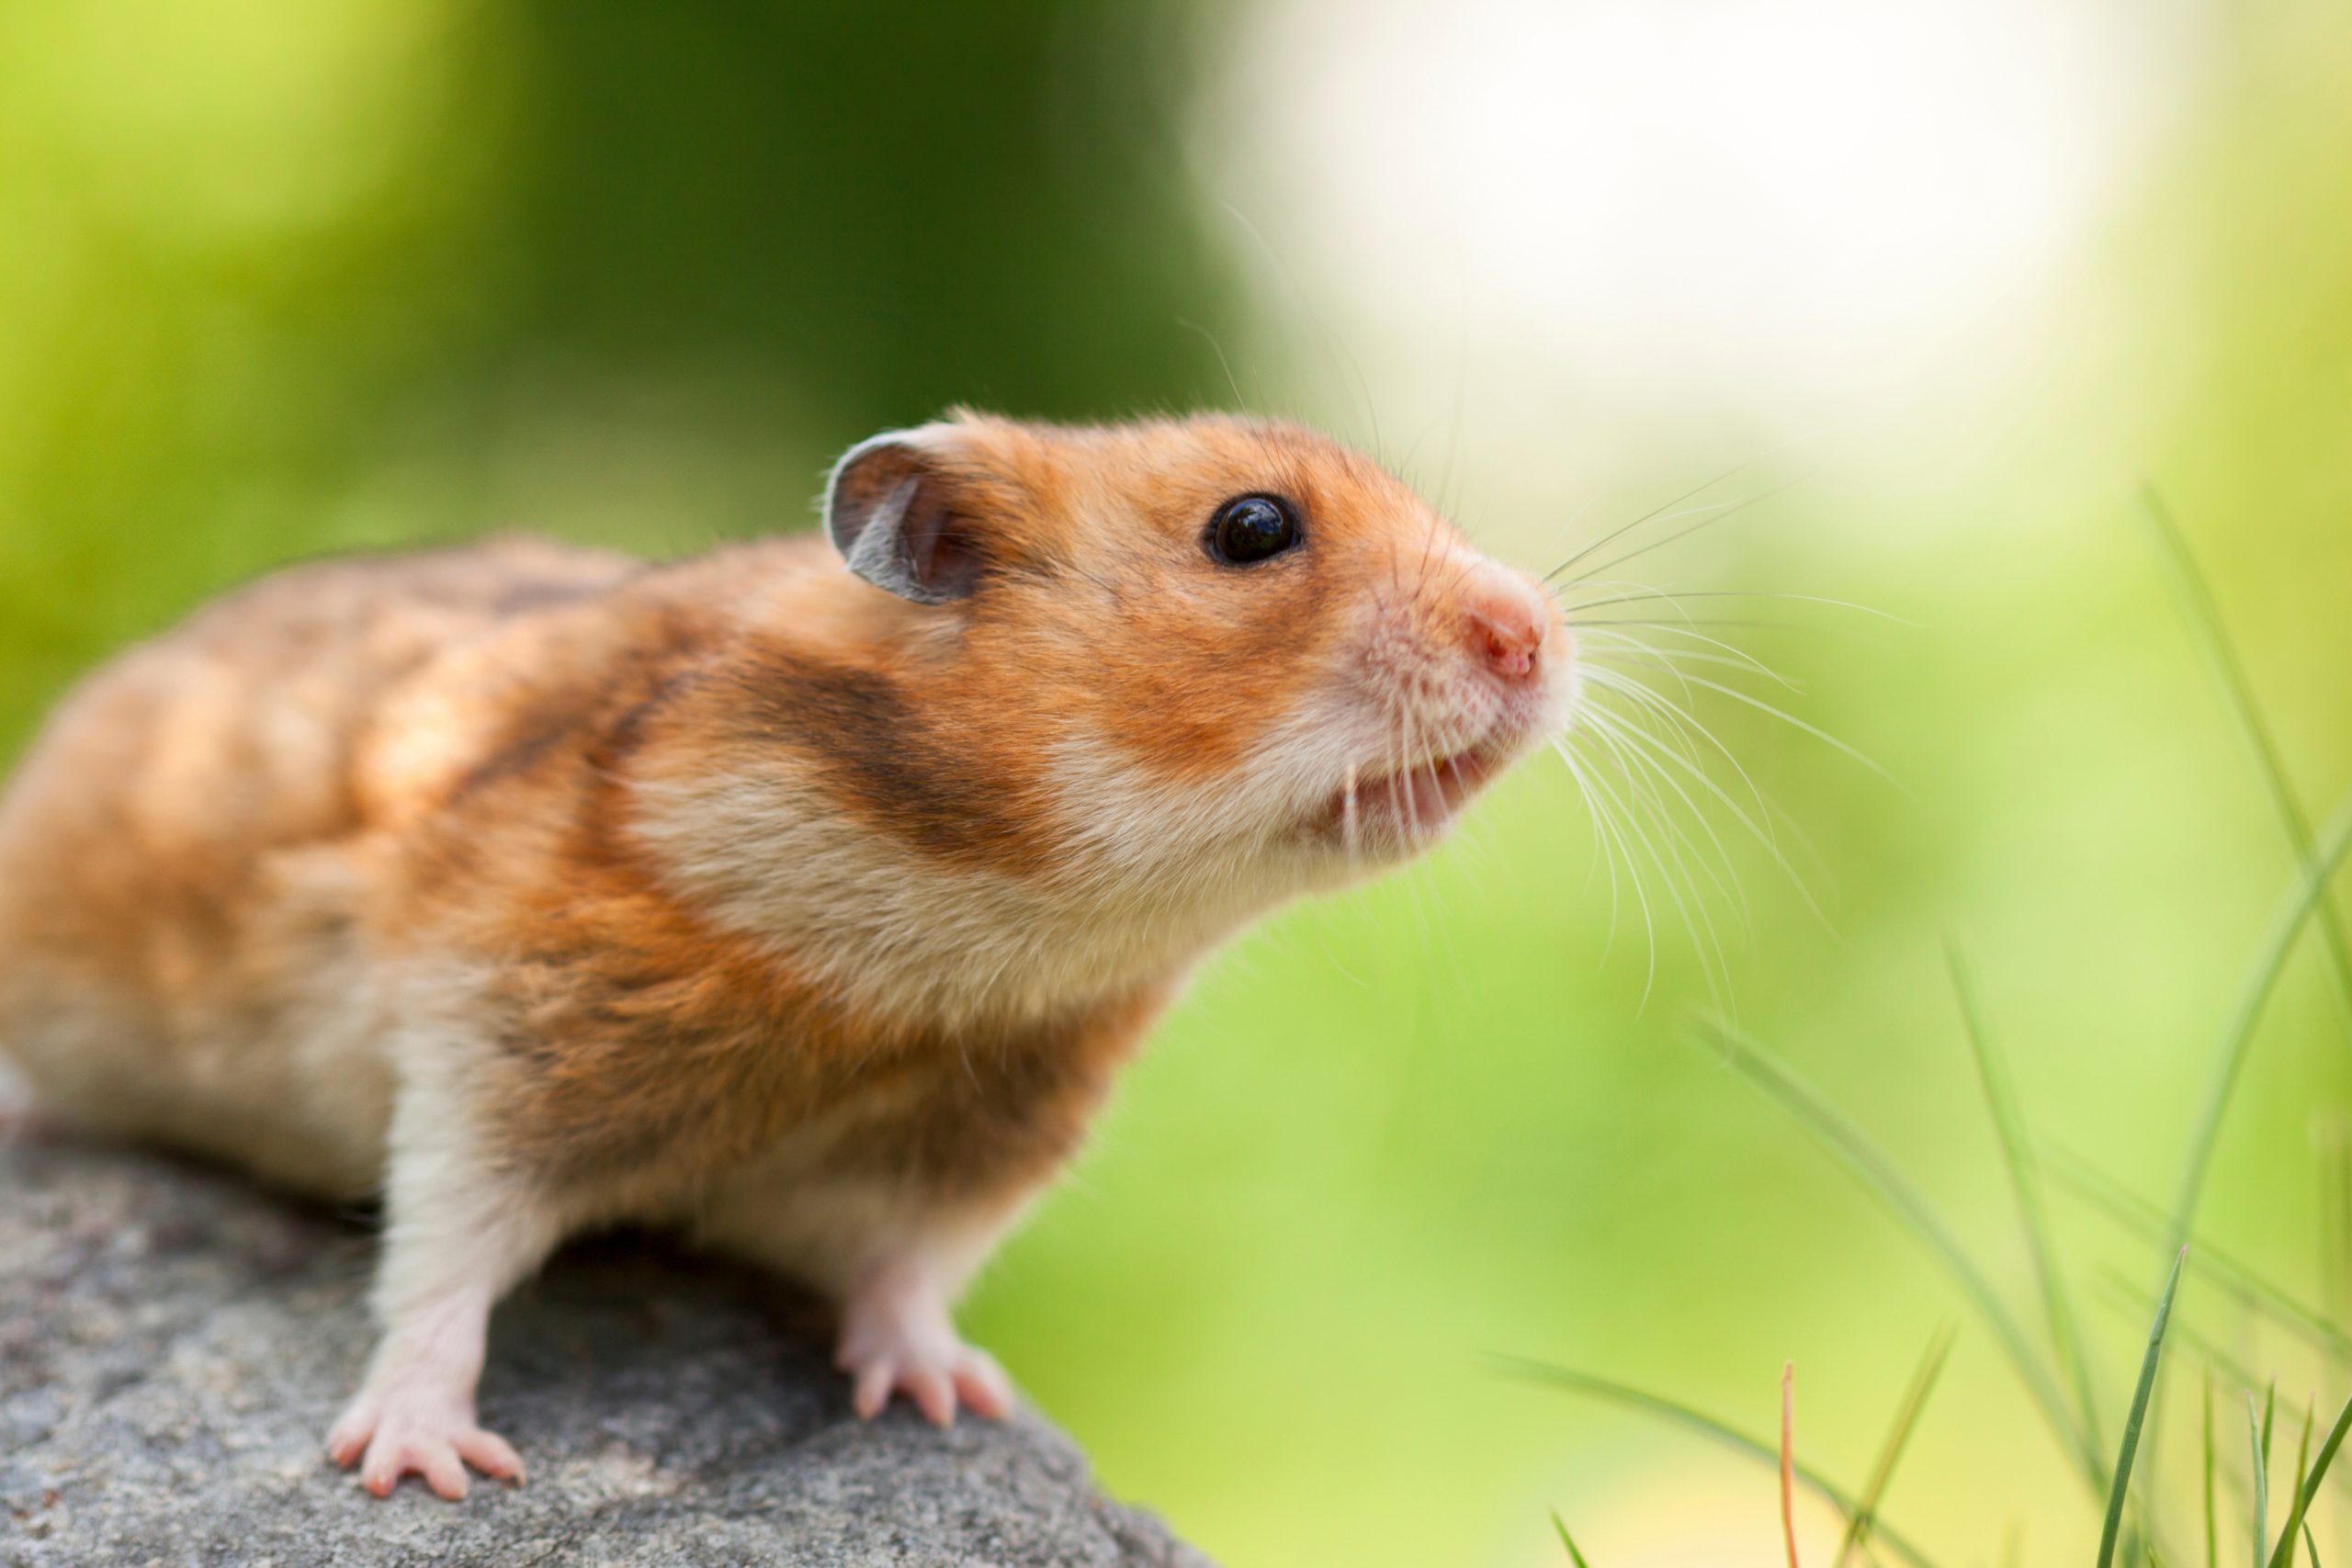 Cute Hamster (Syrian Hamster) on a stone - understand his dreams. - Kaya